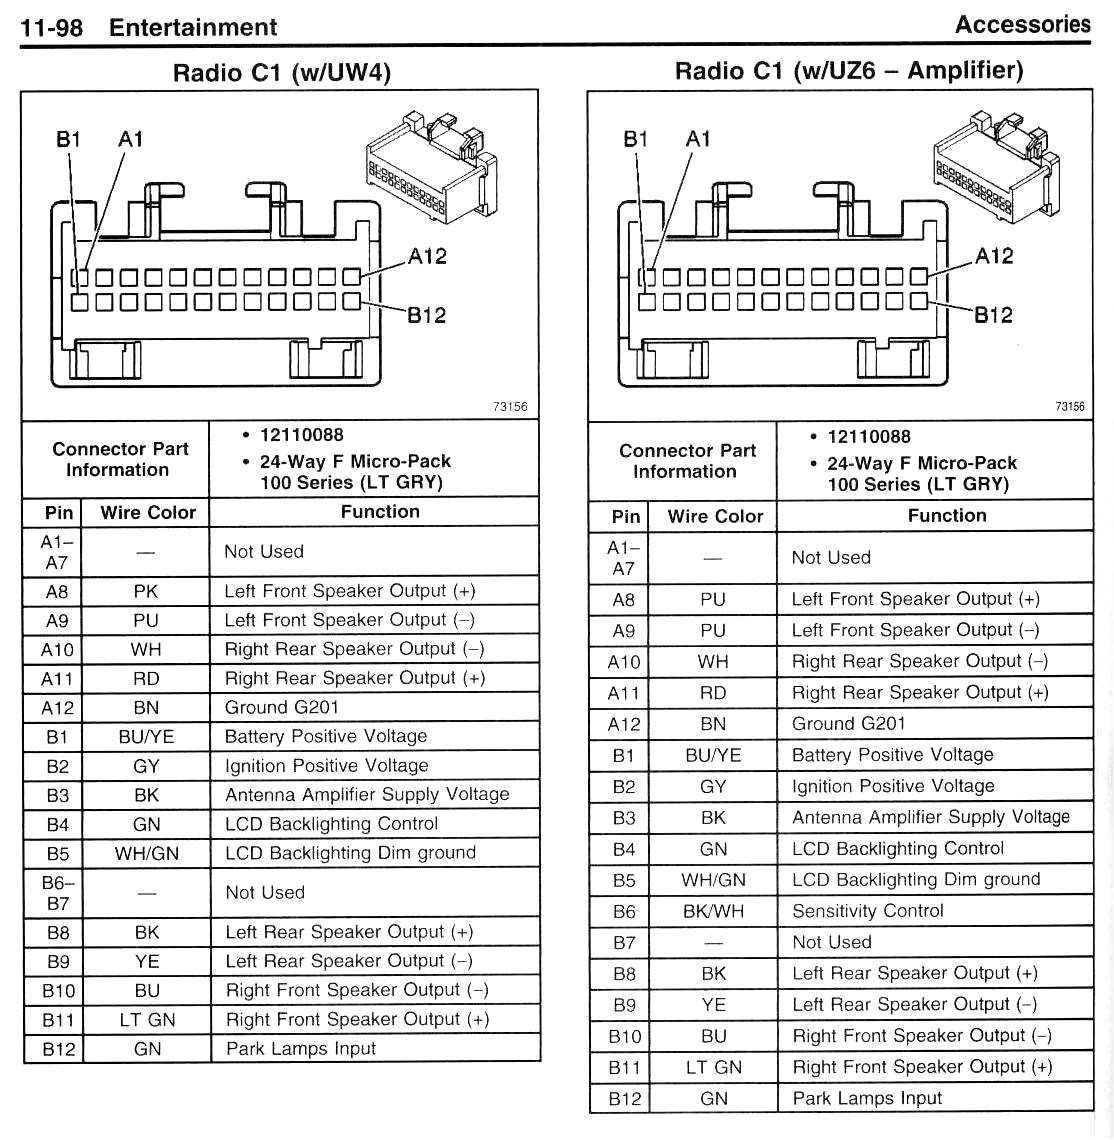 2002 gm stereo wiring harness diagram wiring diagram sample2002 chevy tahoe radio wiring harness diagram wiring